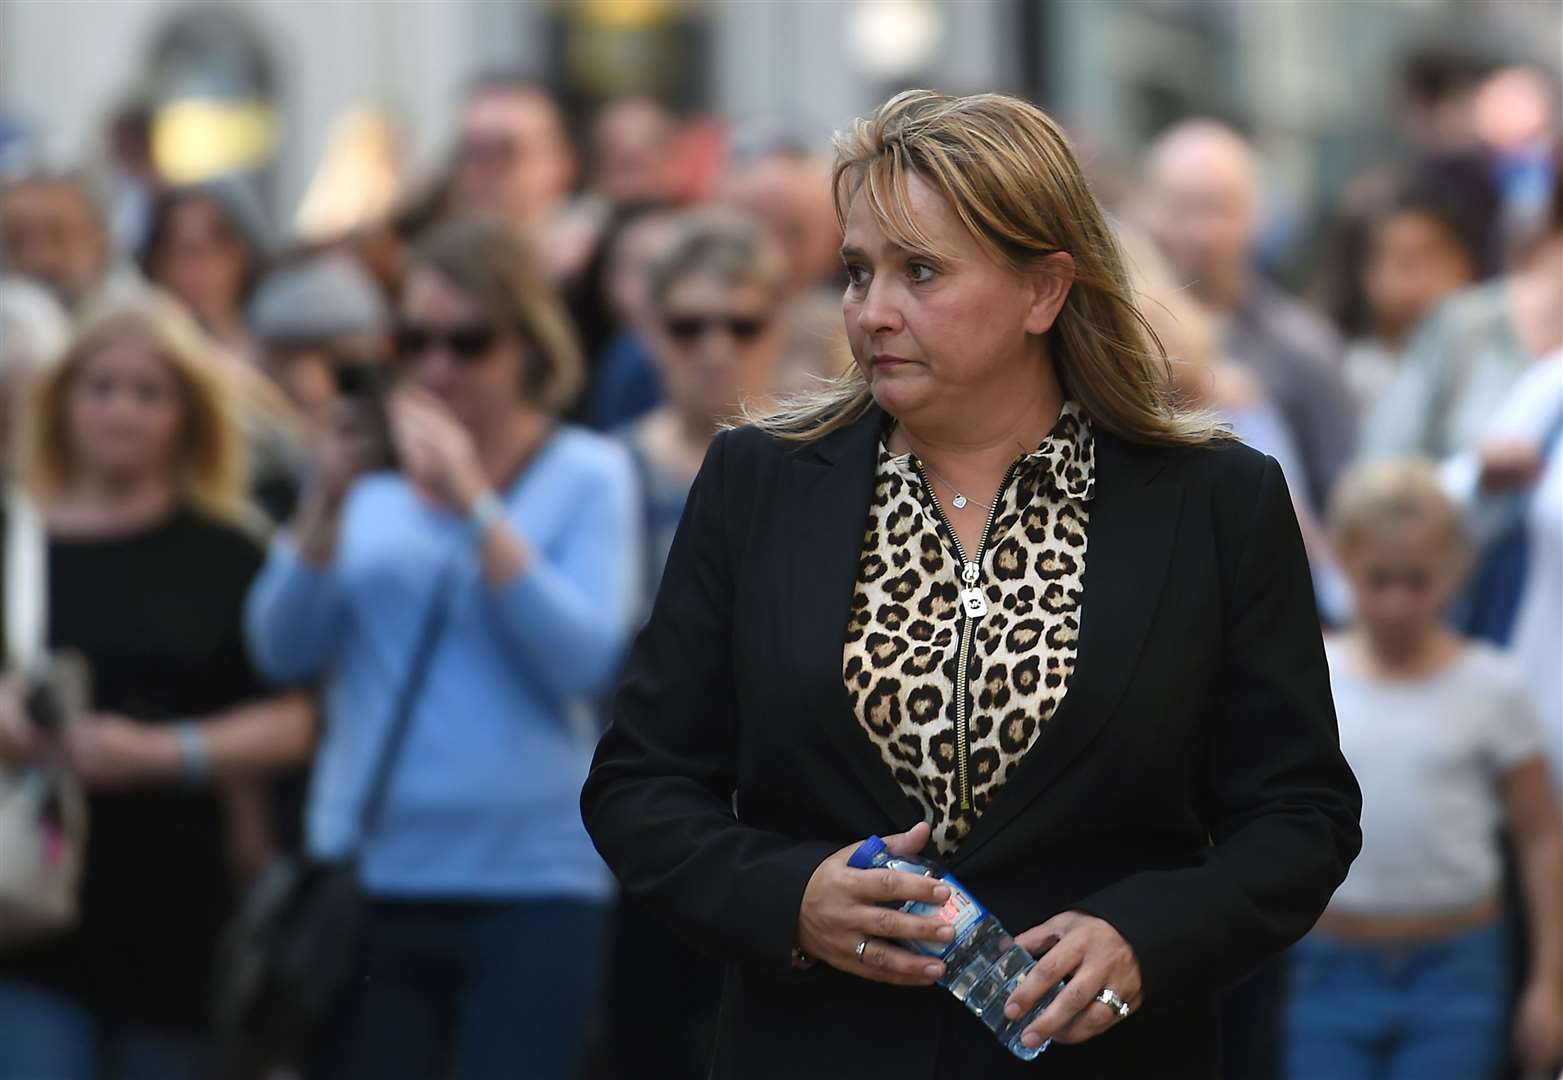 Nicola Urquhart, mother of missing Corrie McKeague, retracing her son’s final steps a year after his disappearance (Joe Giddens/PA)